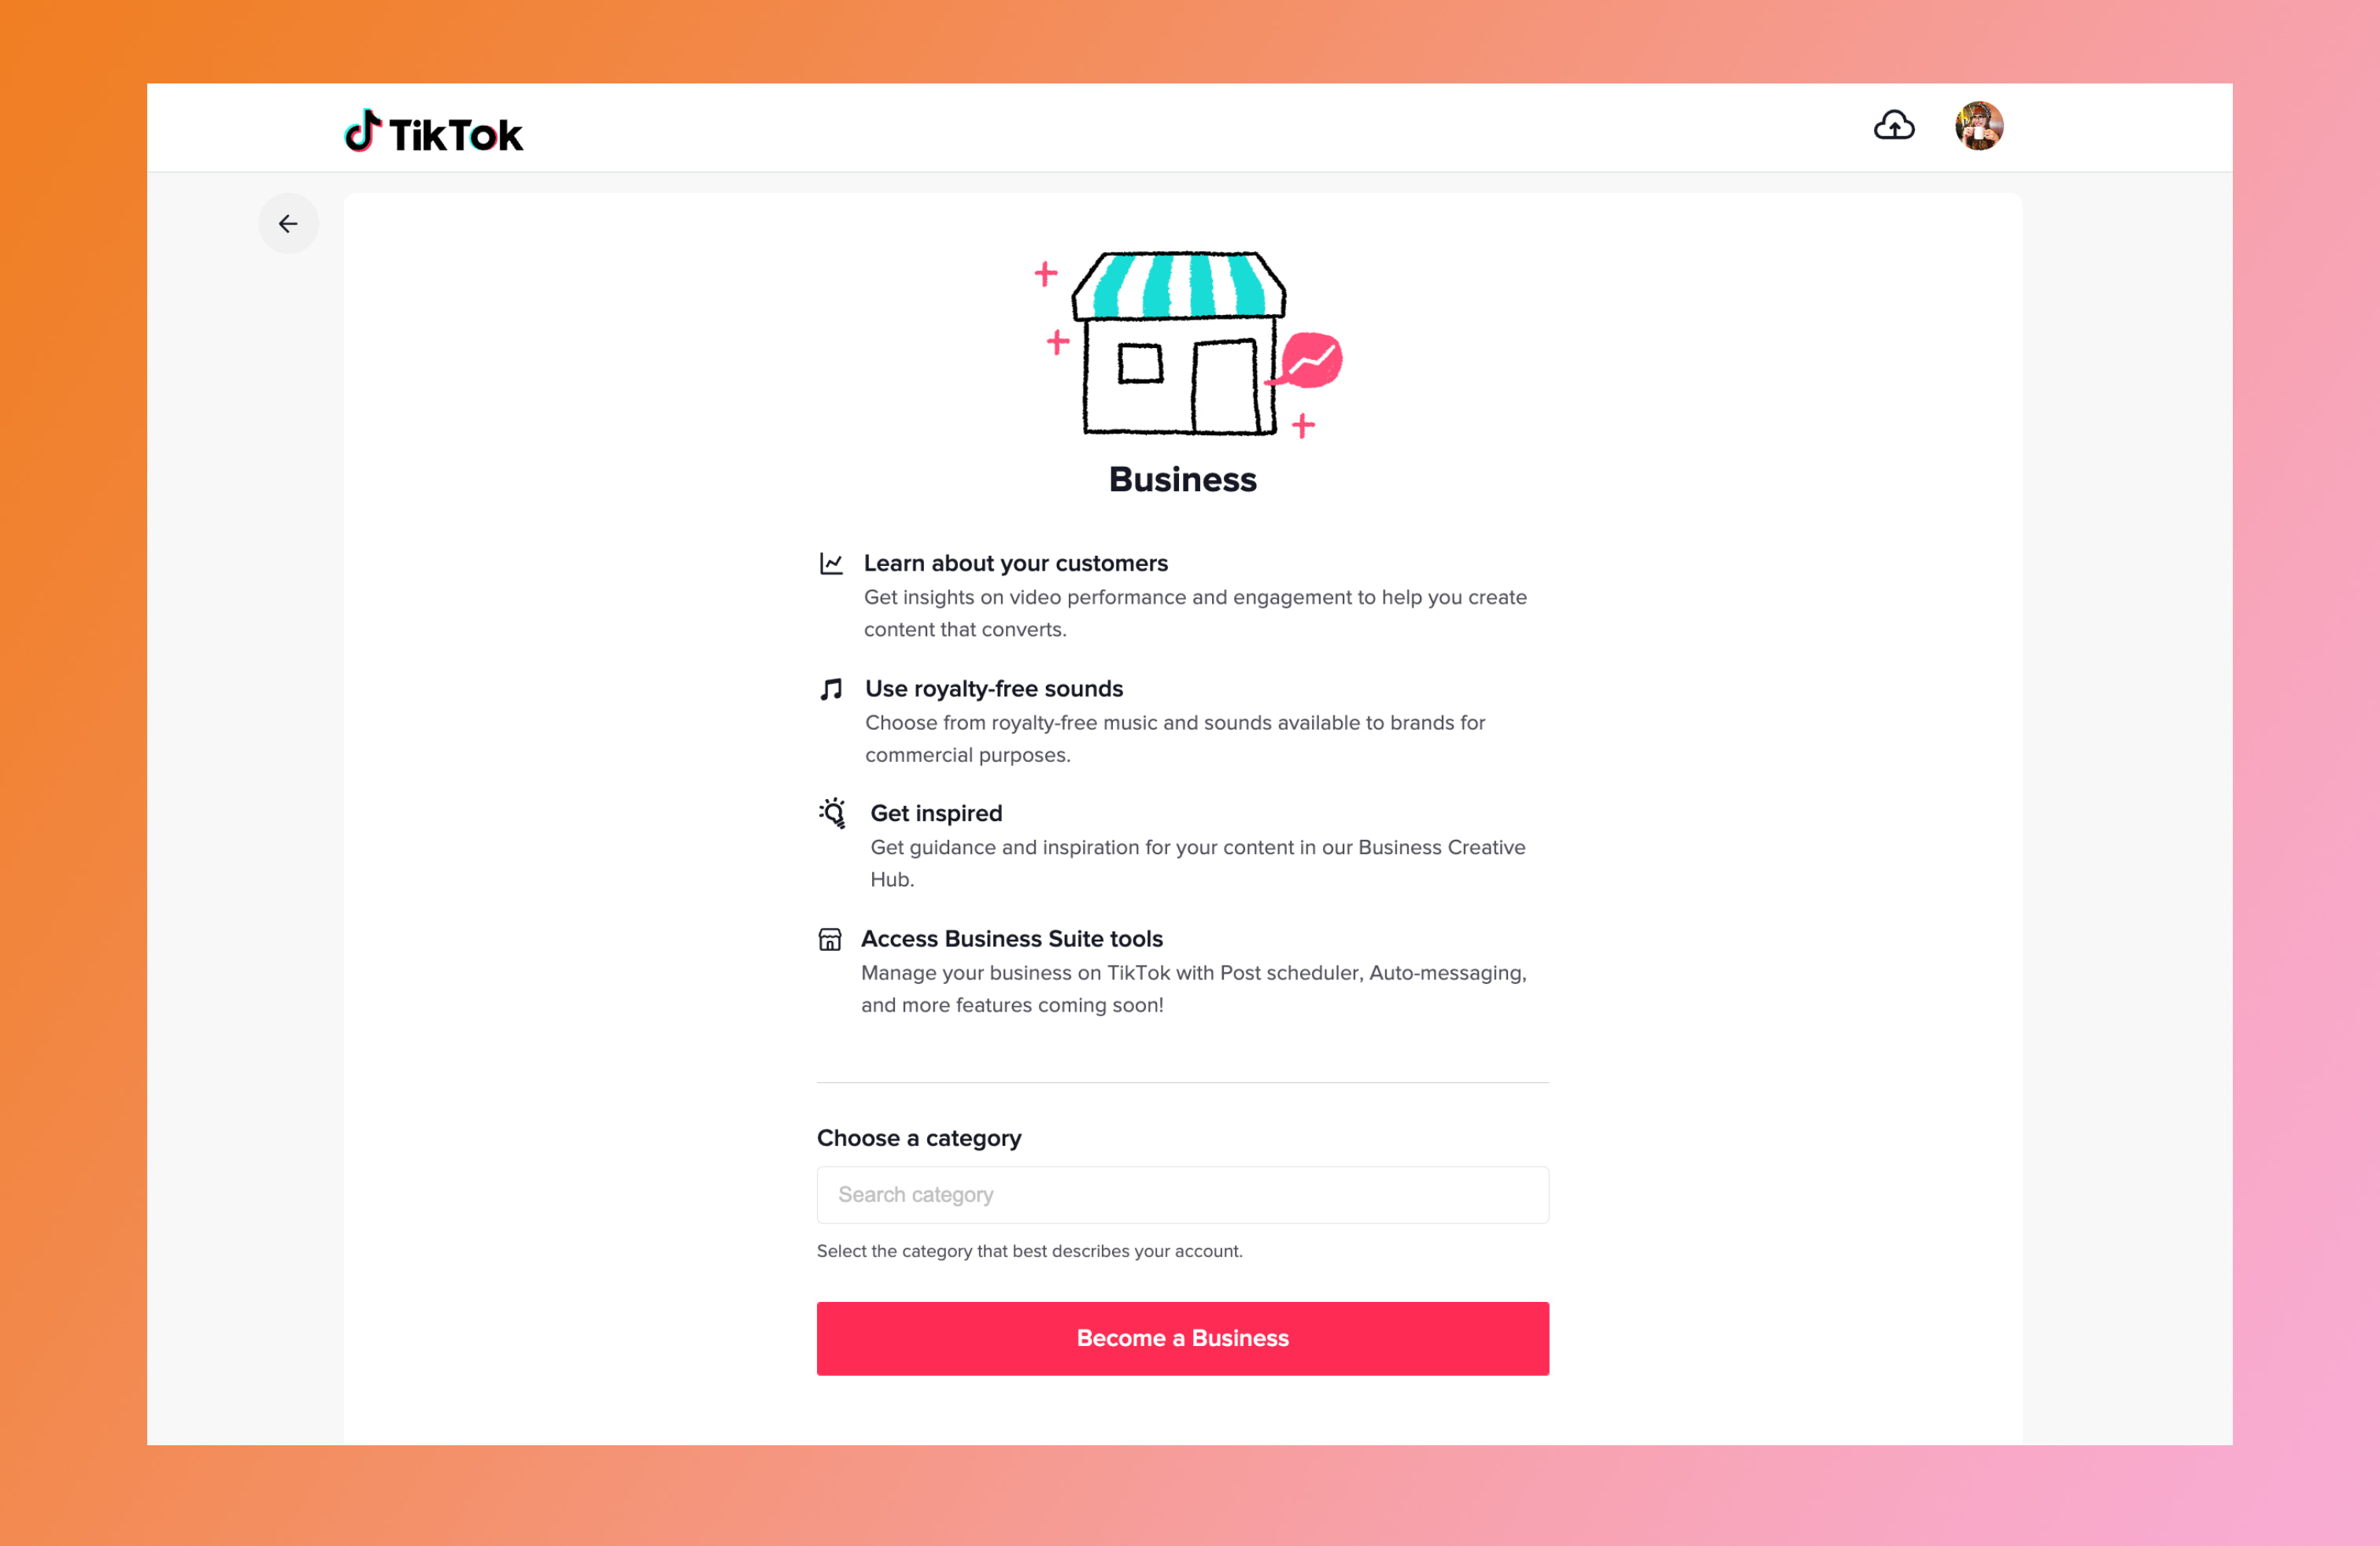 How to Get Verified on TikTok as a Business (with 6 Tips)